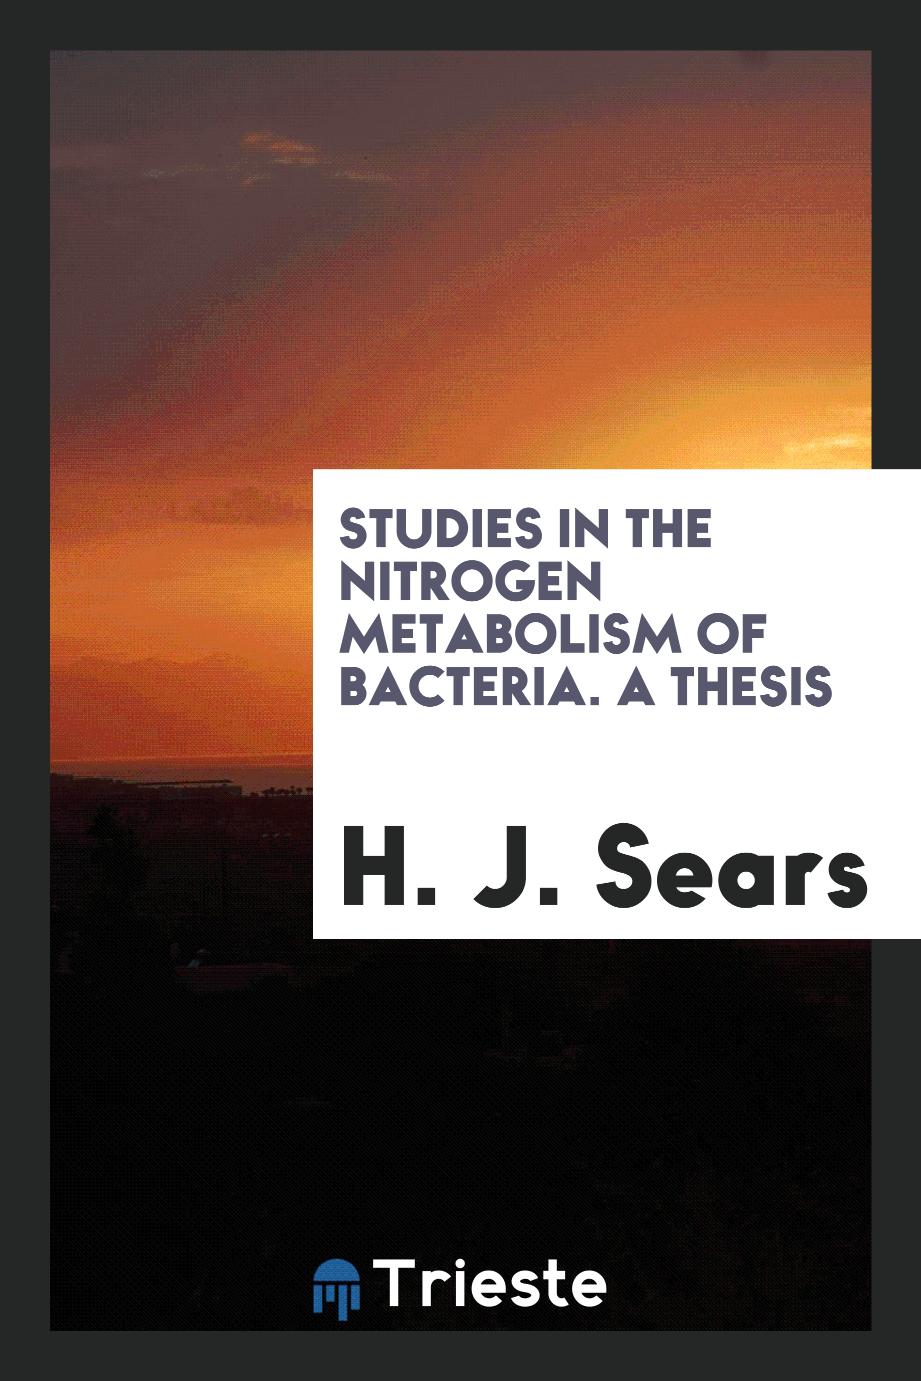 Studies in the nitrogen metabolism of bacteria. A thesis